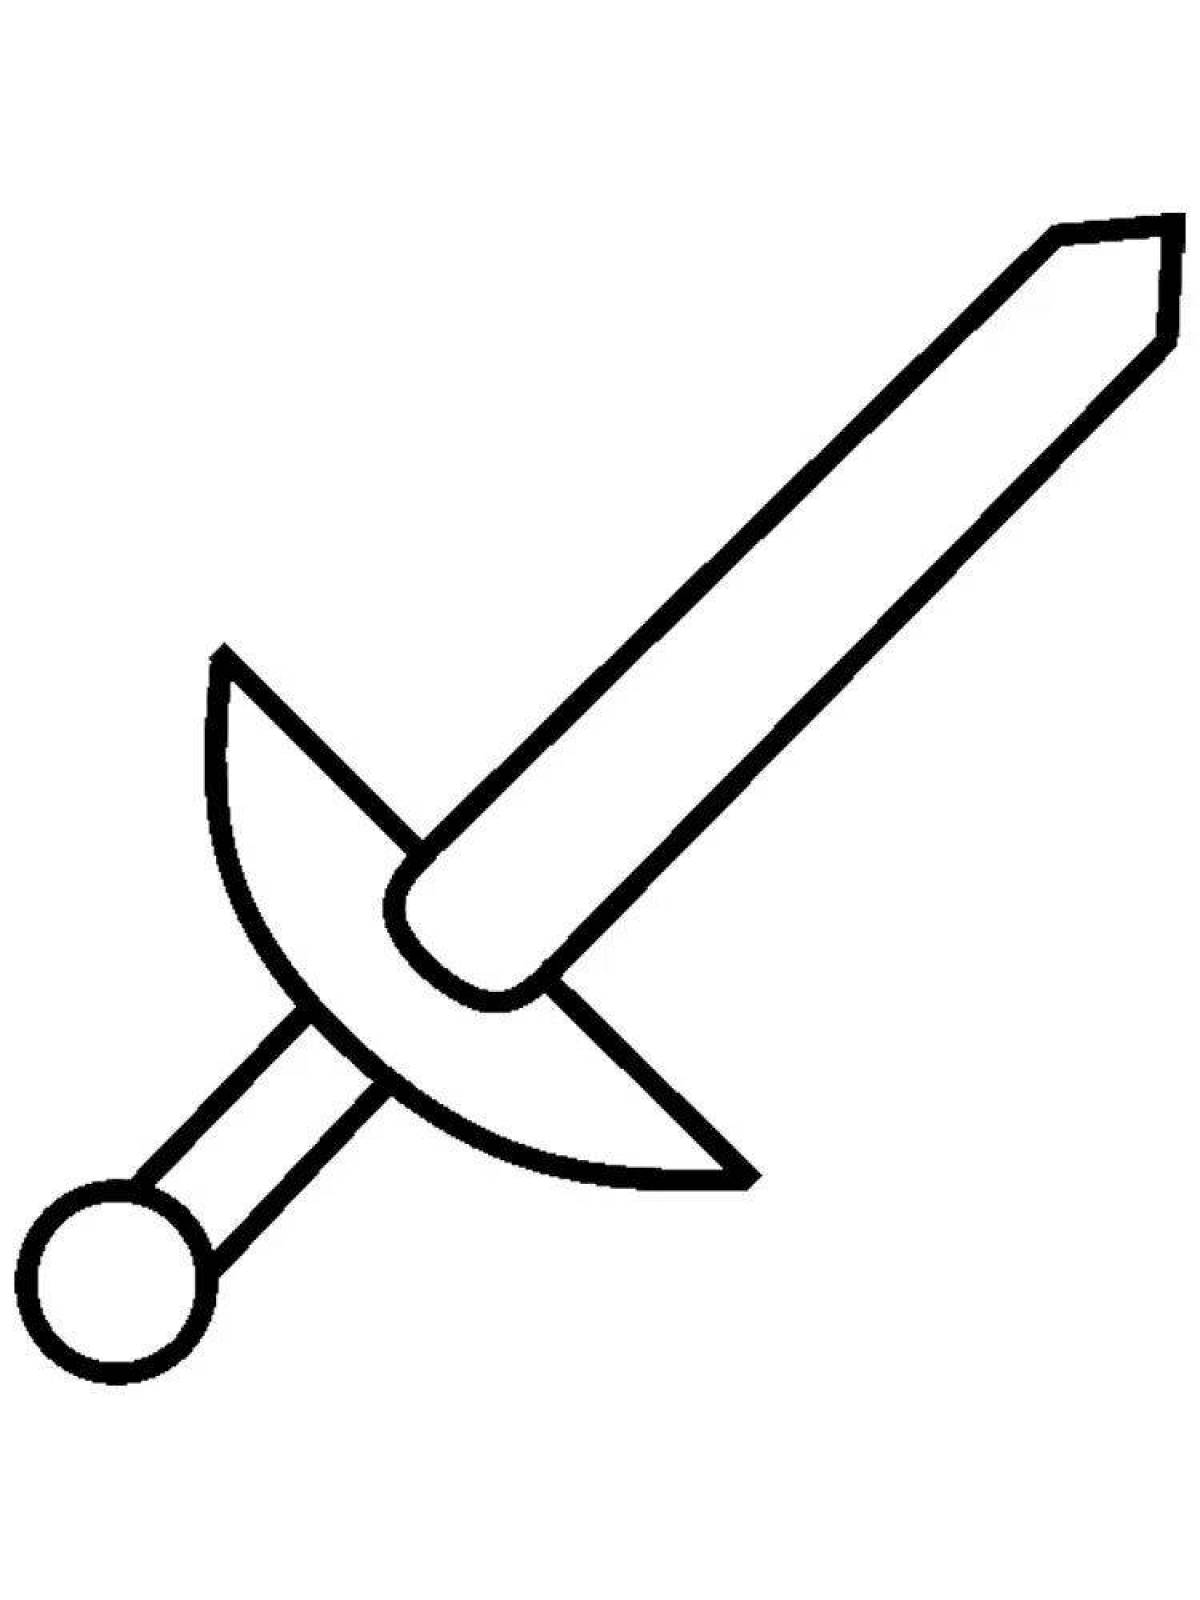 Fabulous sword coloring page for kids